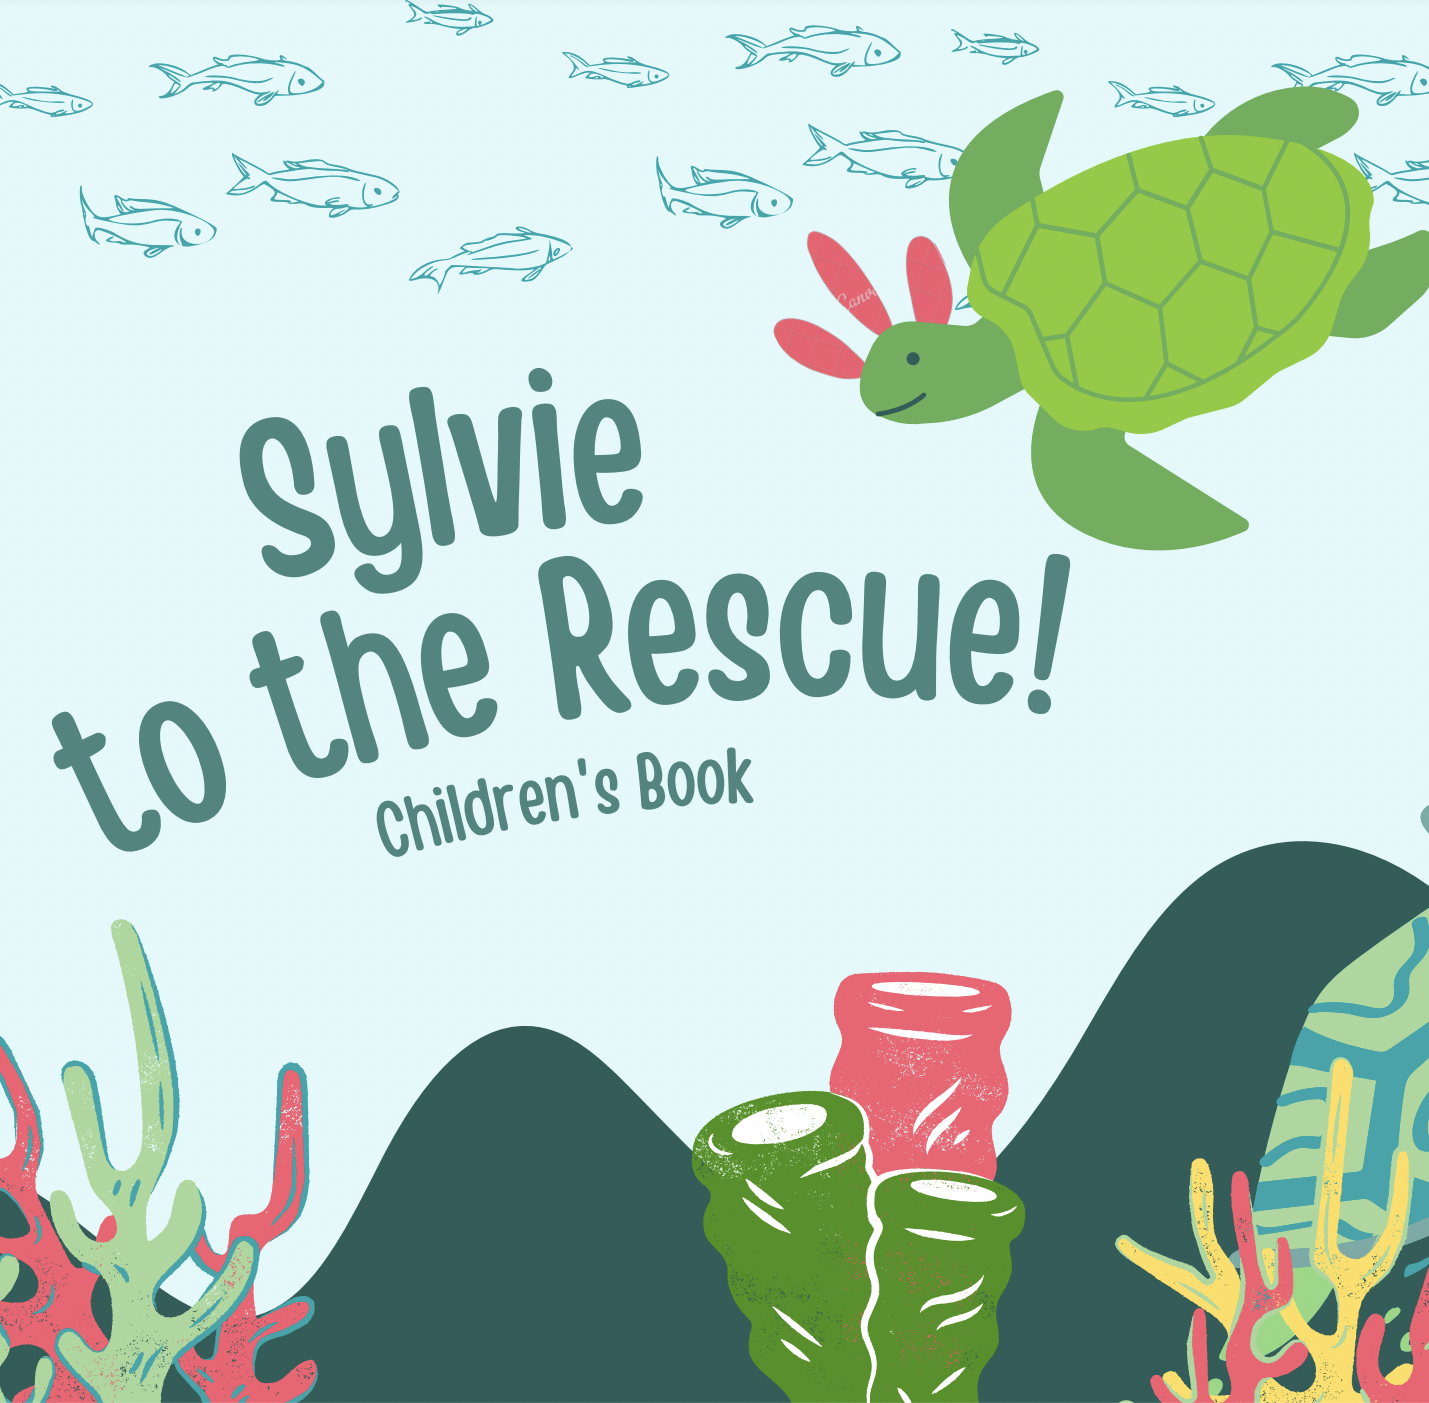 Cover Photo of Sylvie to the Rescue! Children's Book